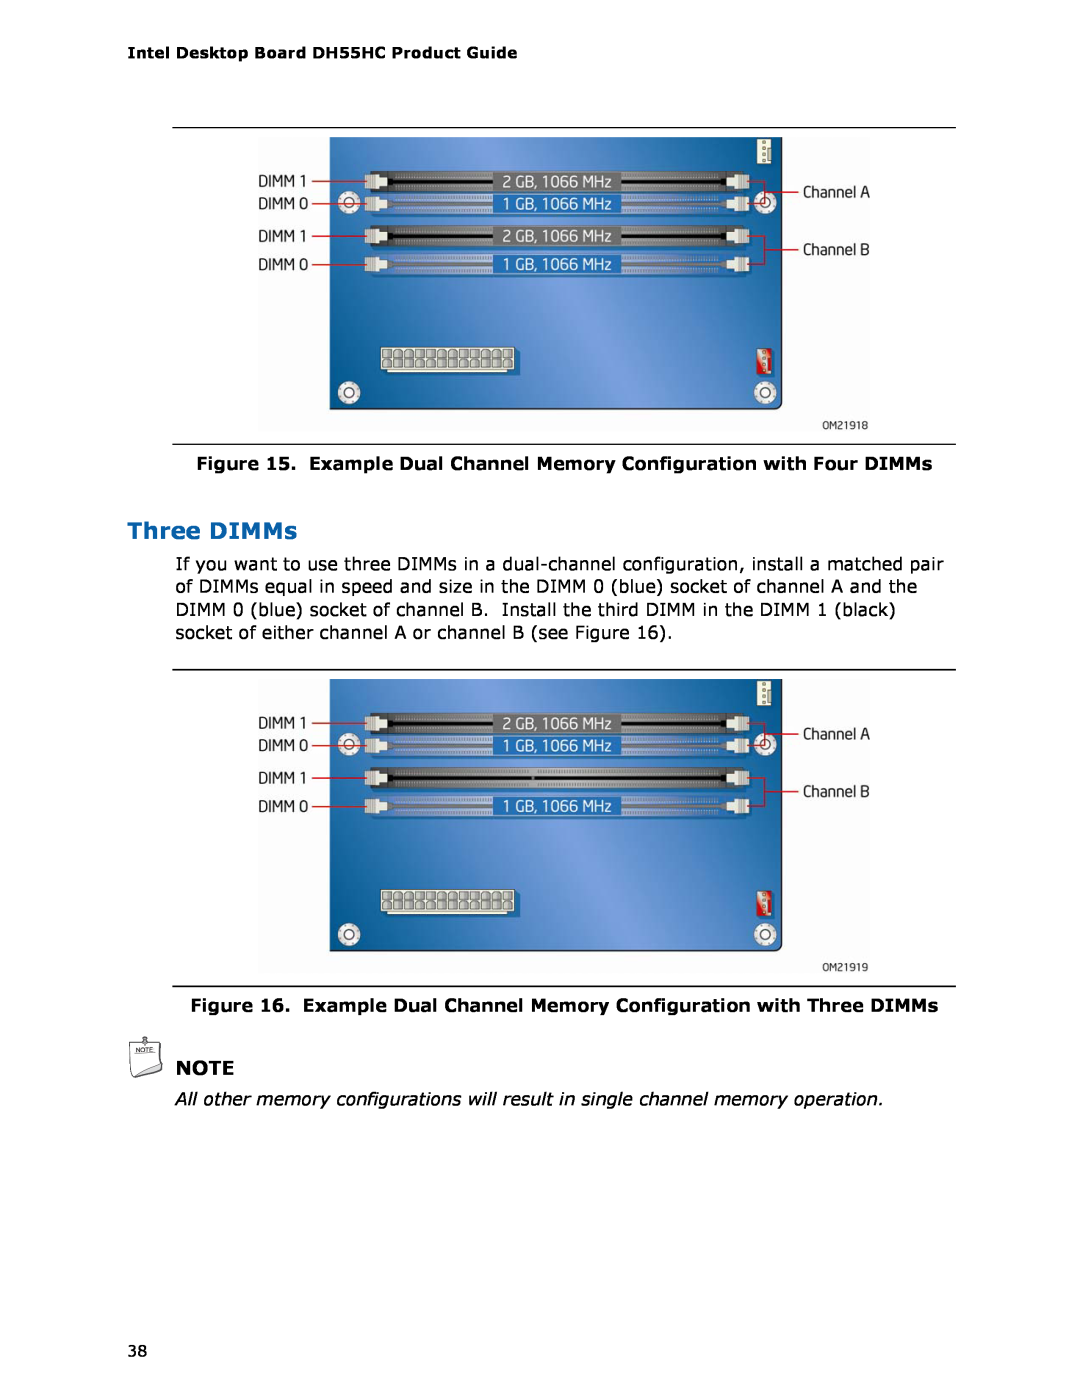 Intel BOXDH55HC manual Three DIMMs, Example Dual Channel Memory Configuration with Four DIMMs 